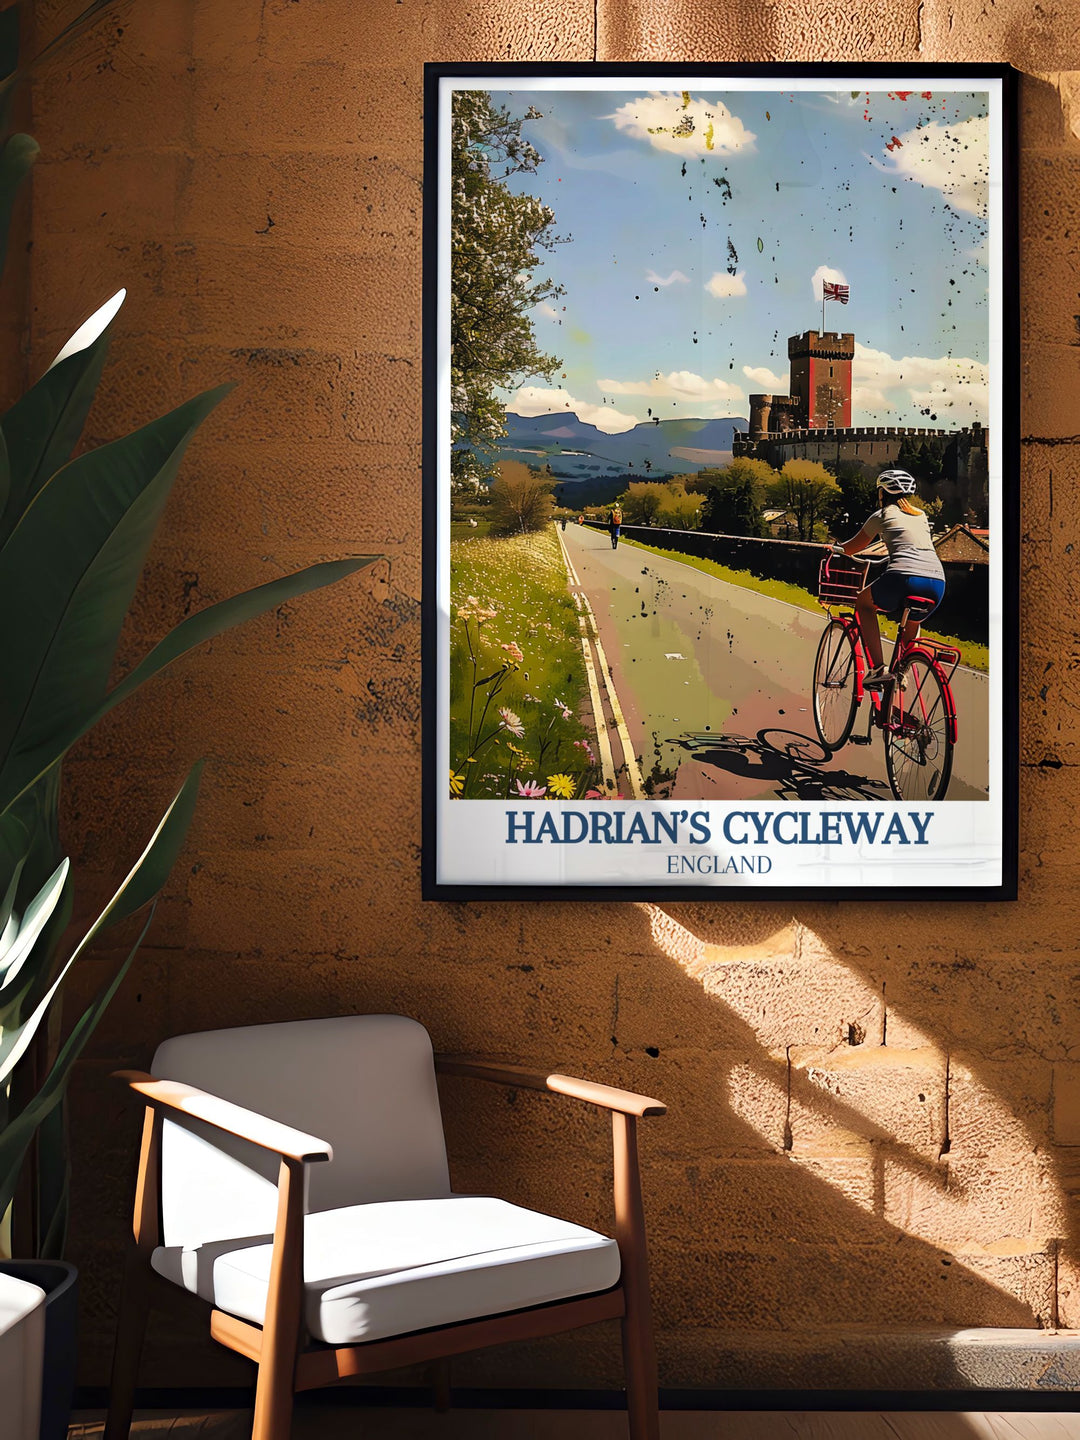 Showcasing the picturesque landscapes of Route 72, this travel poster captures the scenic beauty and diverse attractions of Hadrians Cycleway, bringing a piece of Englands cycling paradise into your home.